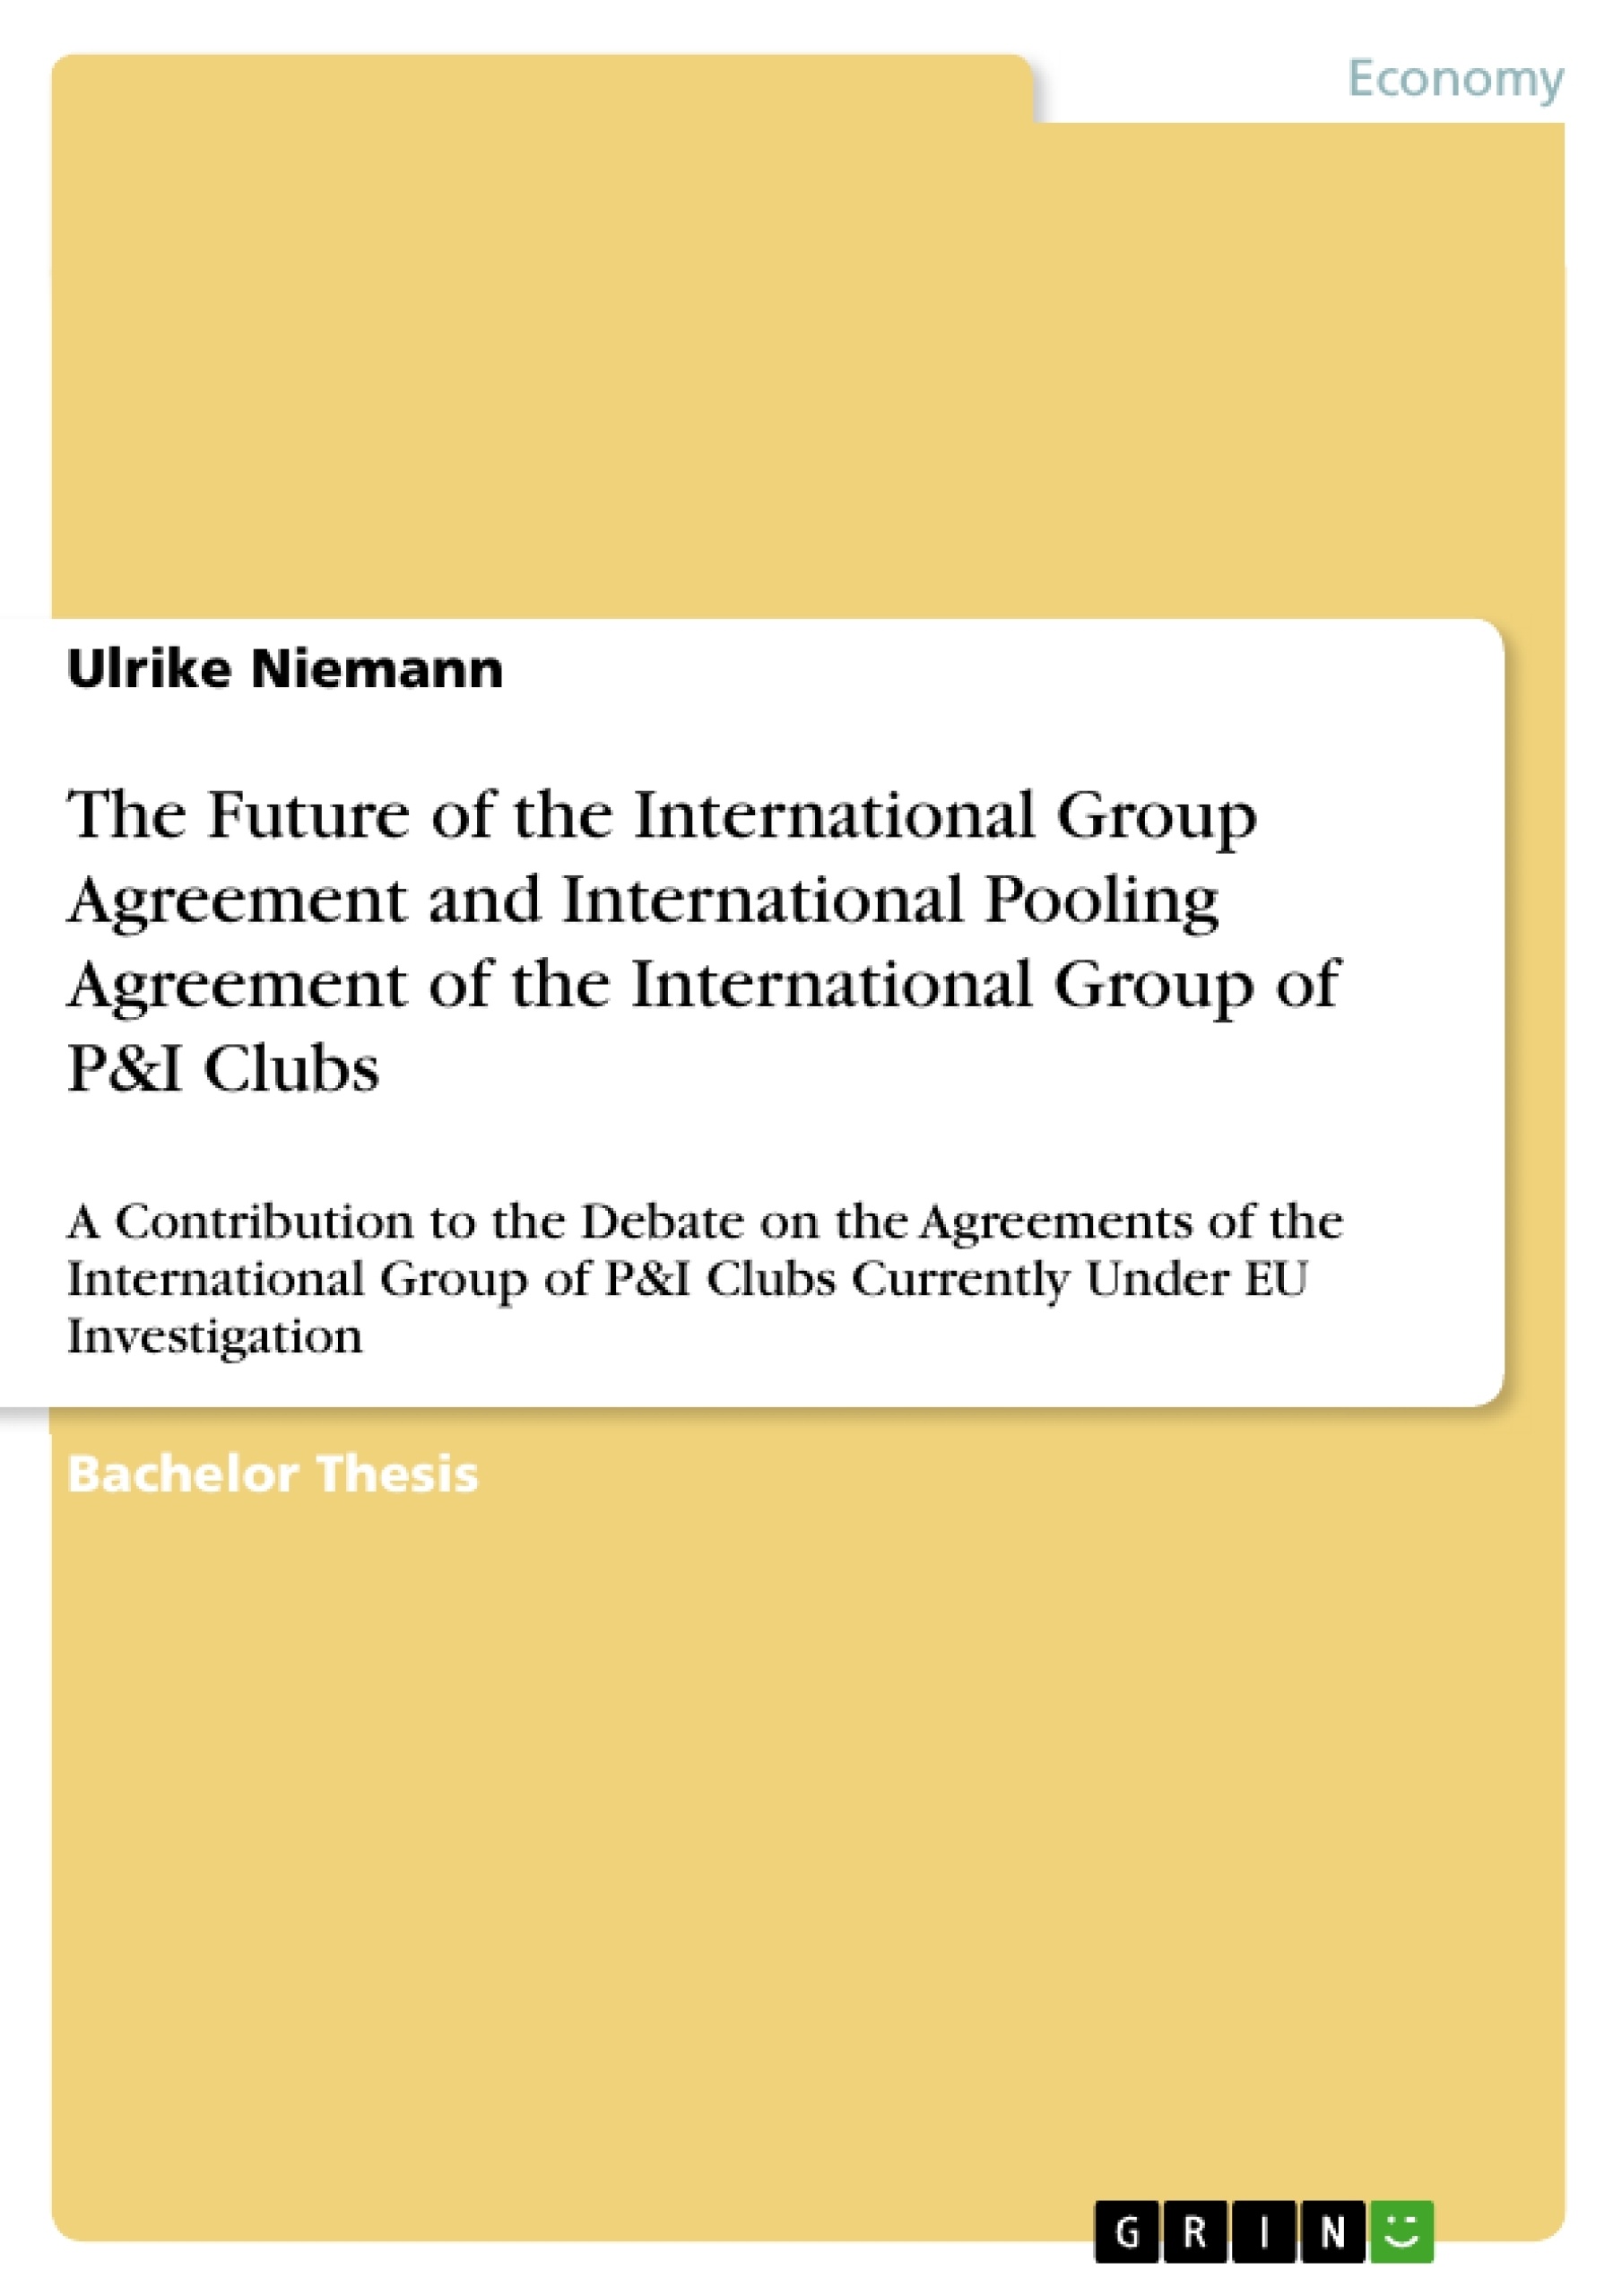 Title: The Future of the International Group Agreement and International Pooling Agreement of the International Group of P&I Clubs